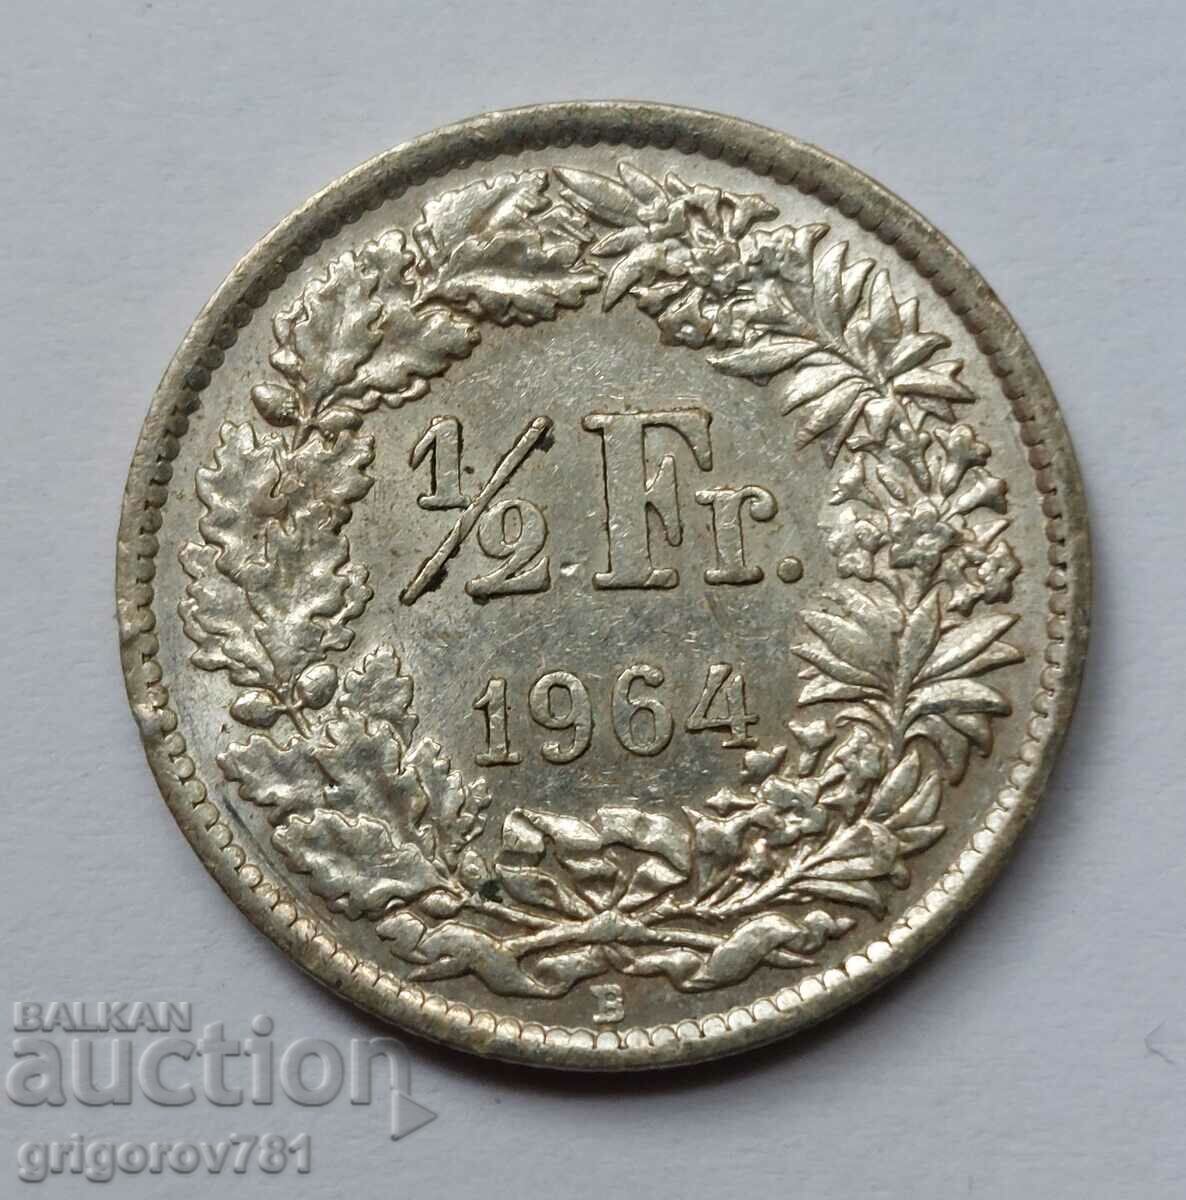 1/2 Franc Silver Switzerland 1964 - Silver Coin #1